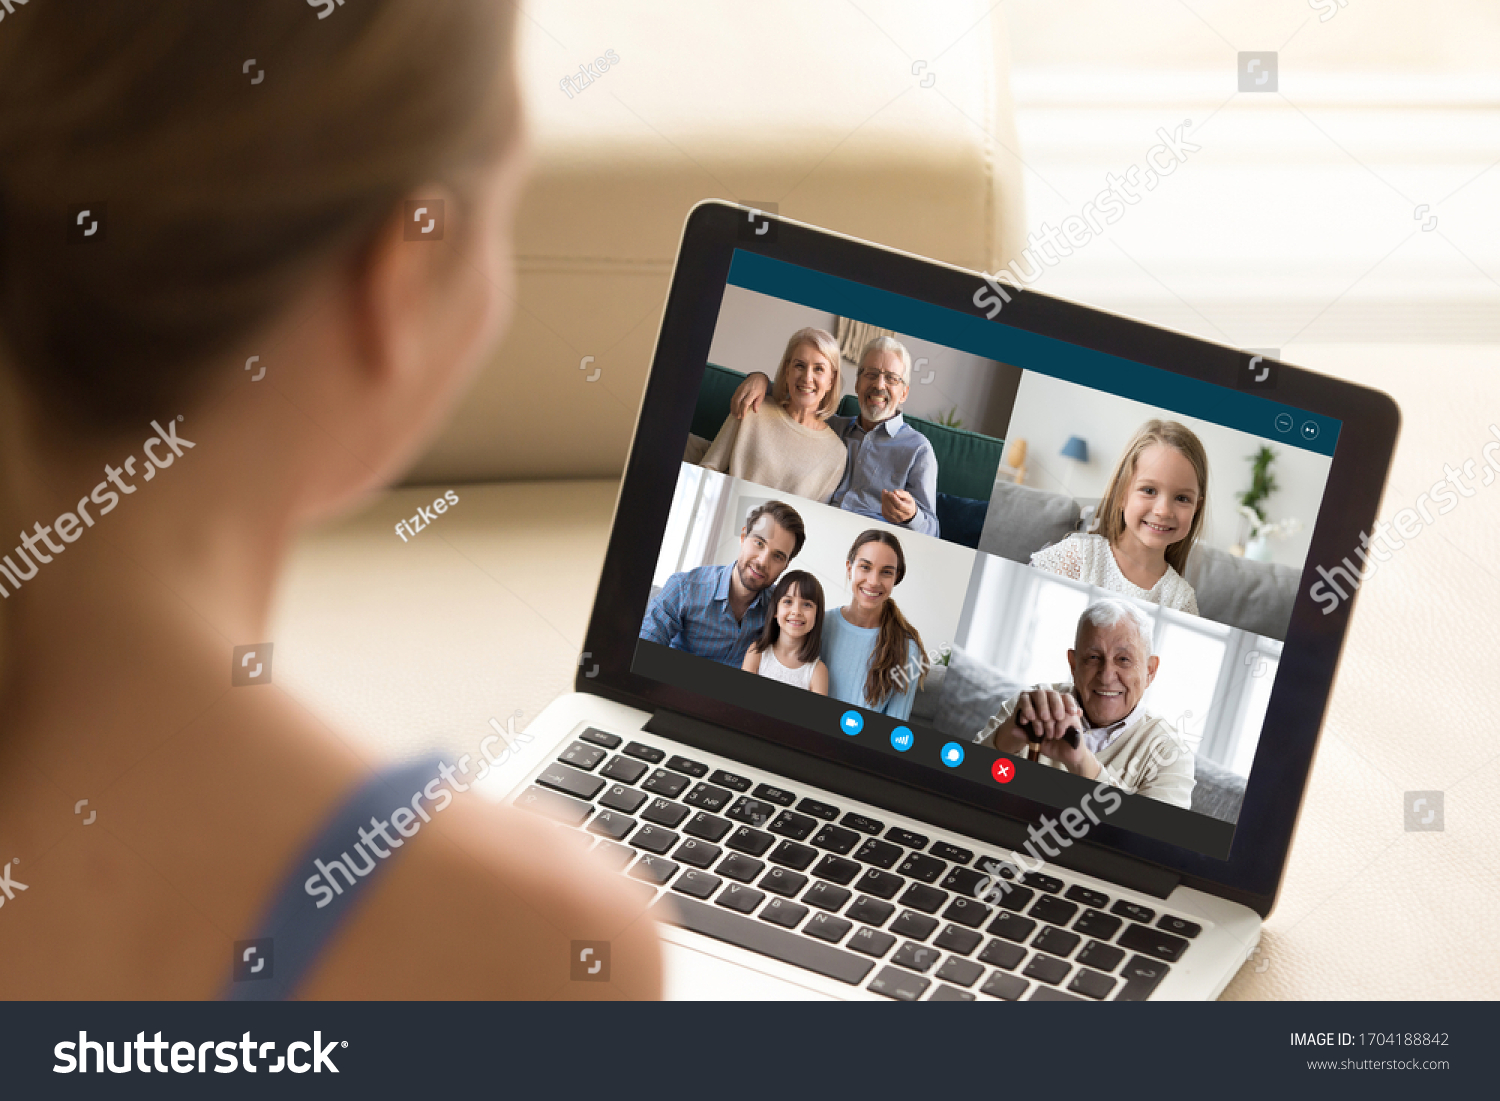 View over girl shoulder, use webcam and laptop enjoy distant communication with family. Diverse relatives people chatting via videoconference application modern technology for make life easier concept #1704188842